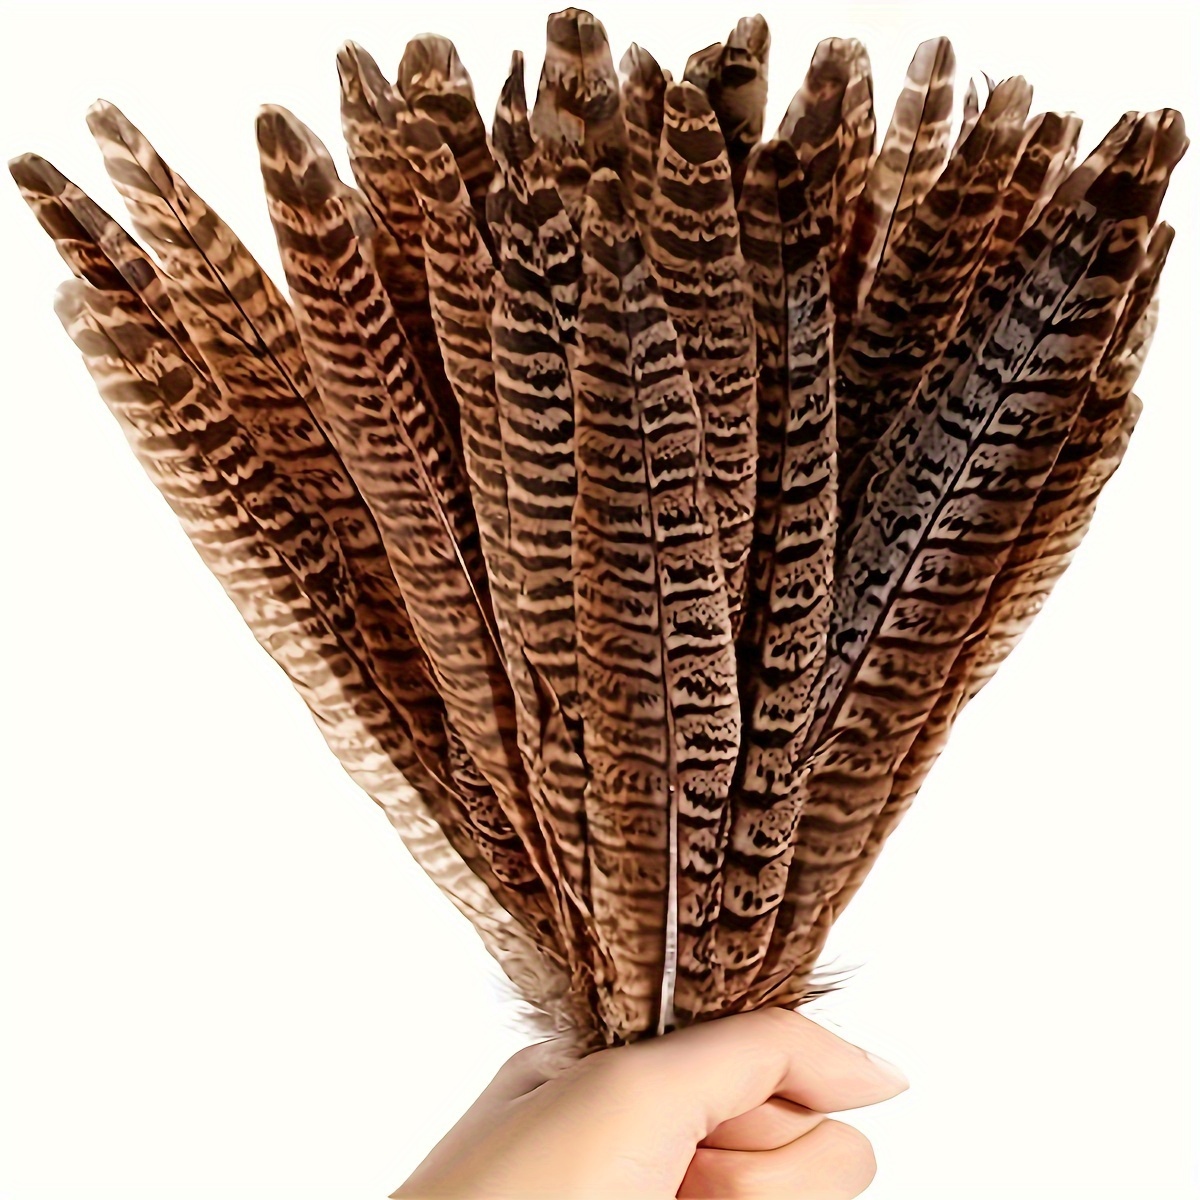 Natural Ringneck Female - Pheasant Feathers